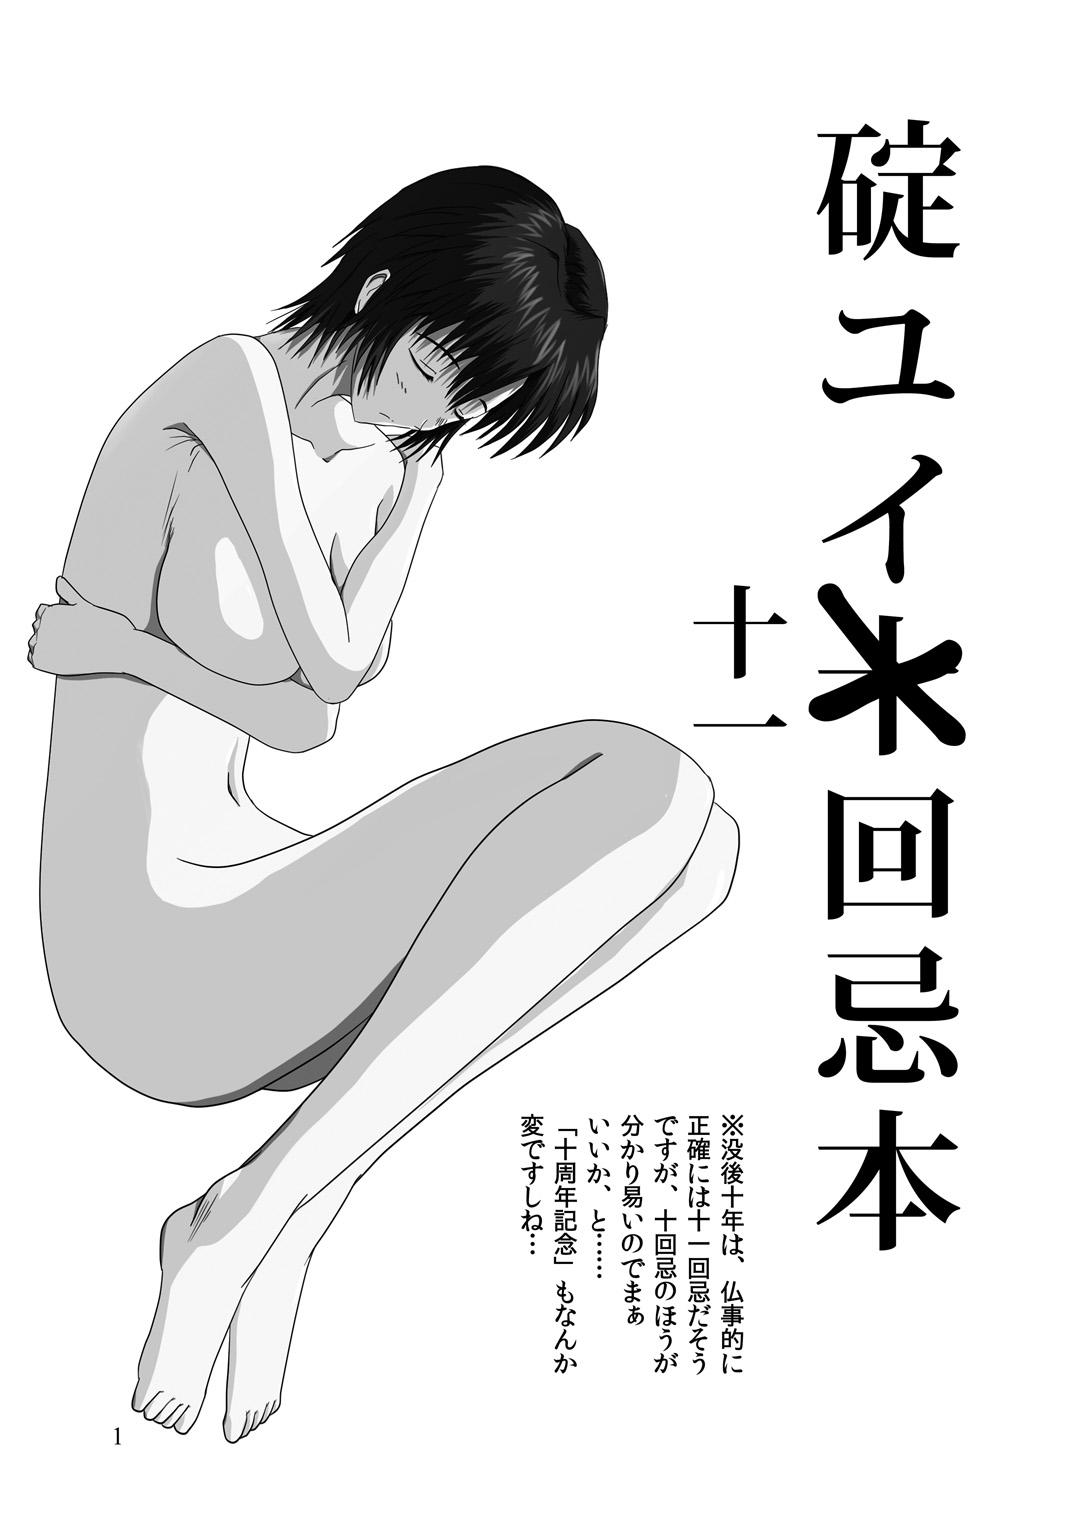 Wet Cunts Yui Ikari 10th Anniversary Book - beyond the time - Neon genesis evangelion Culos - Picture 2